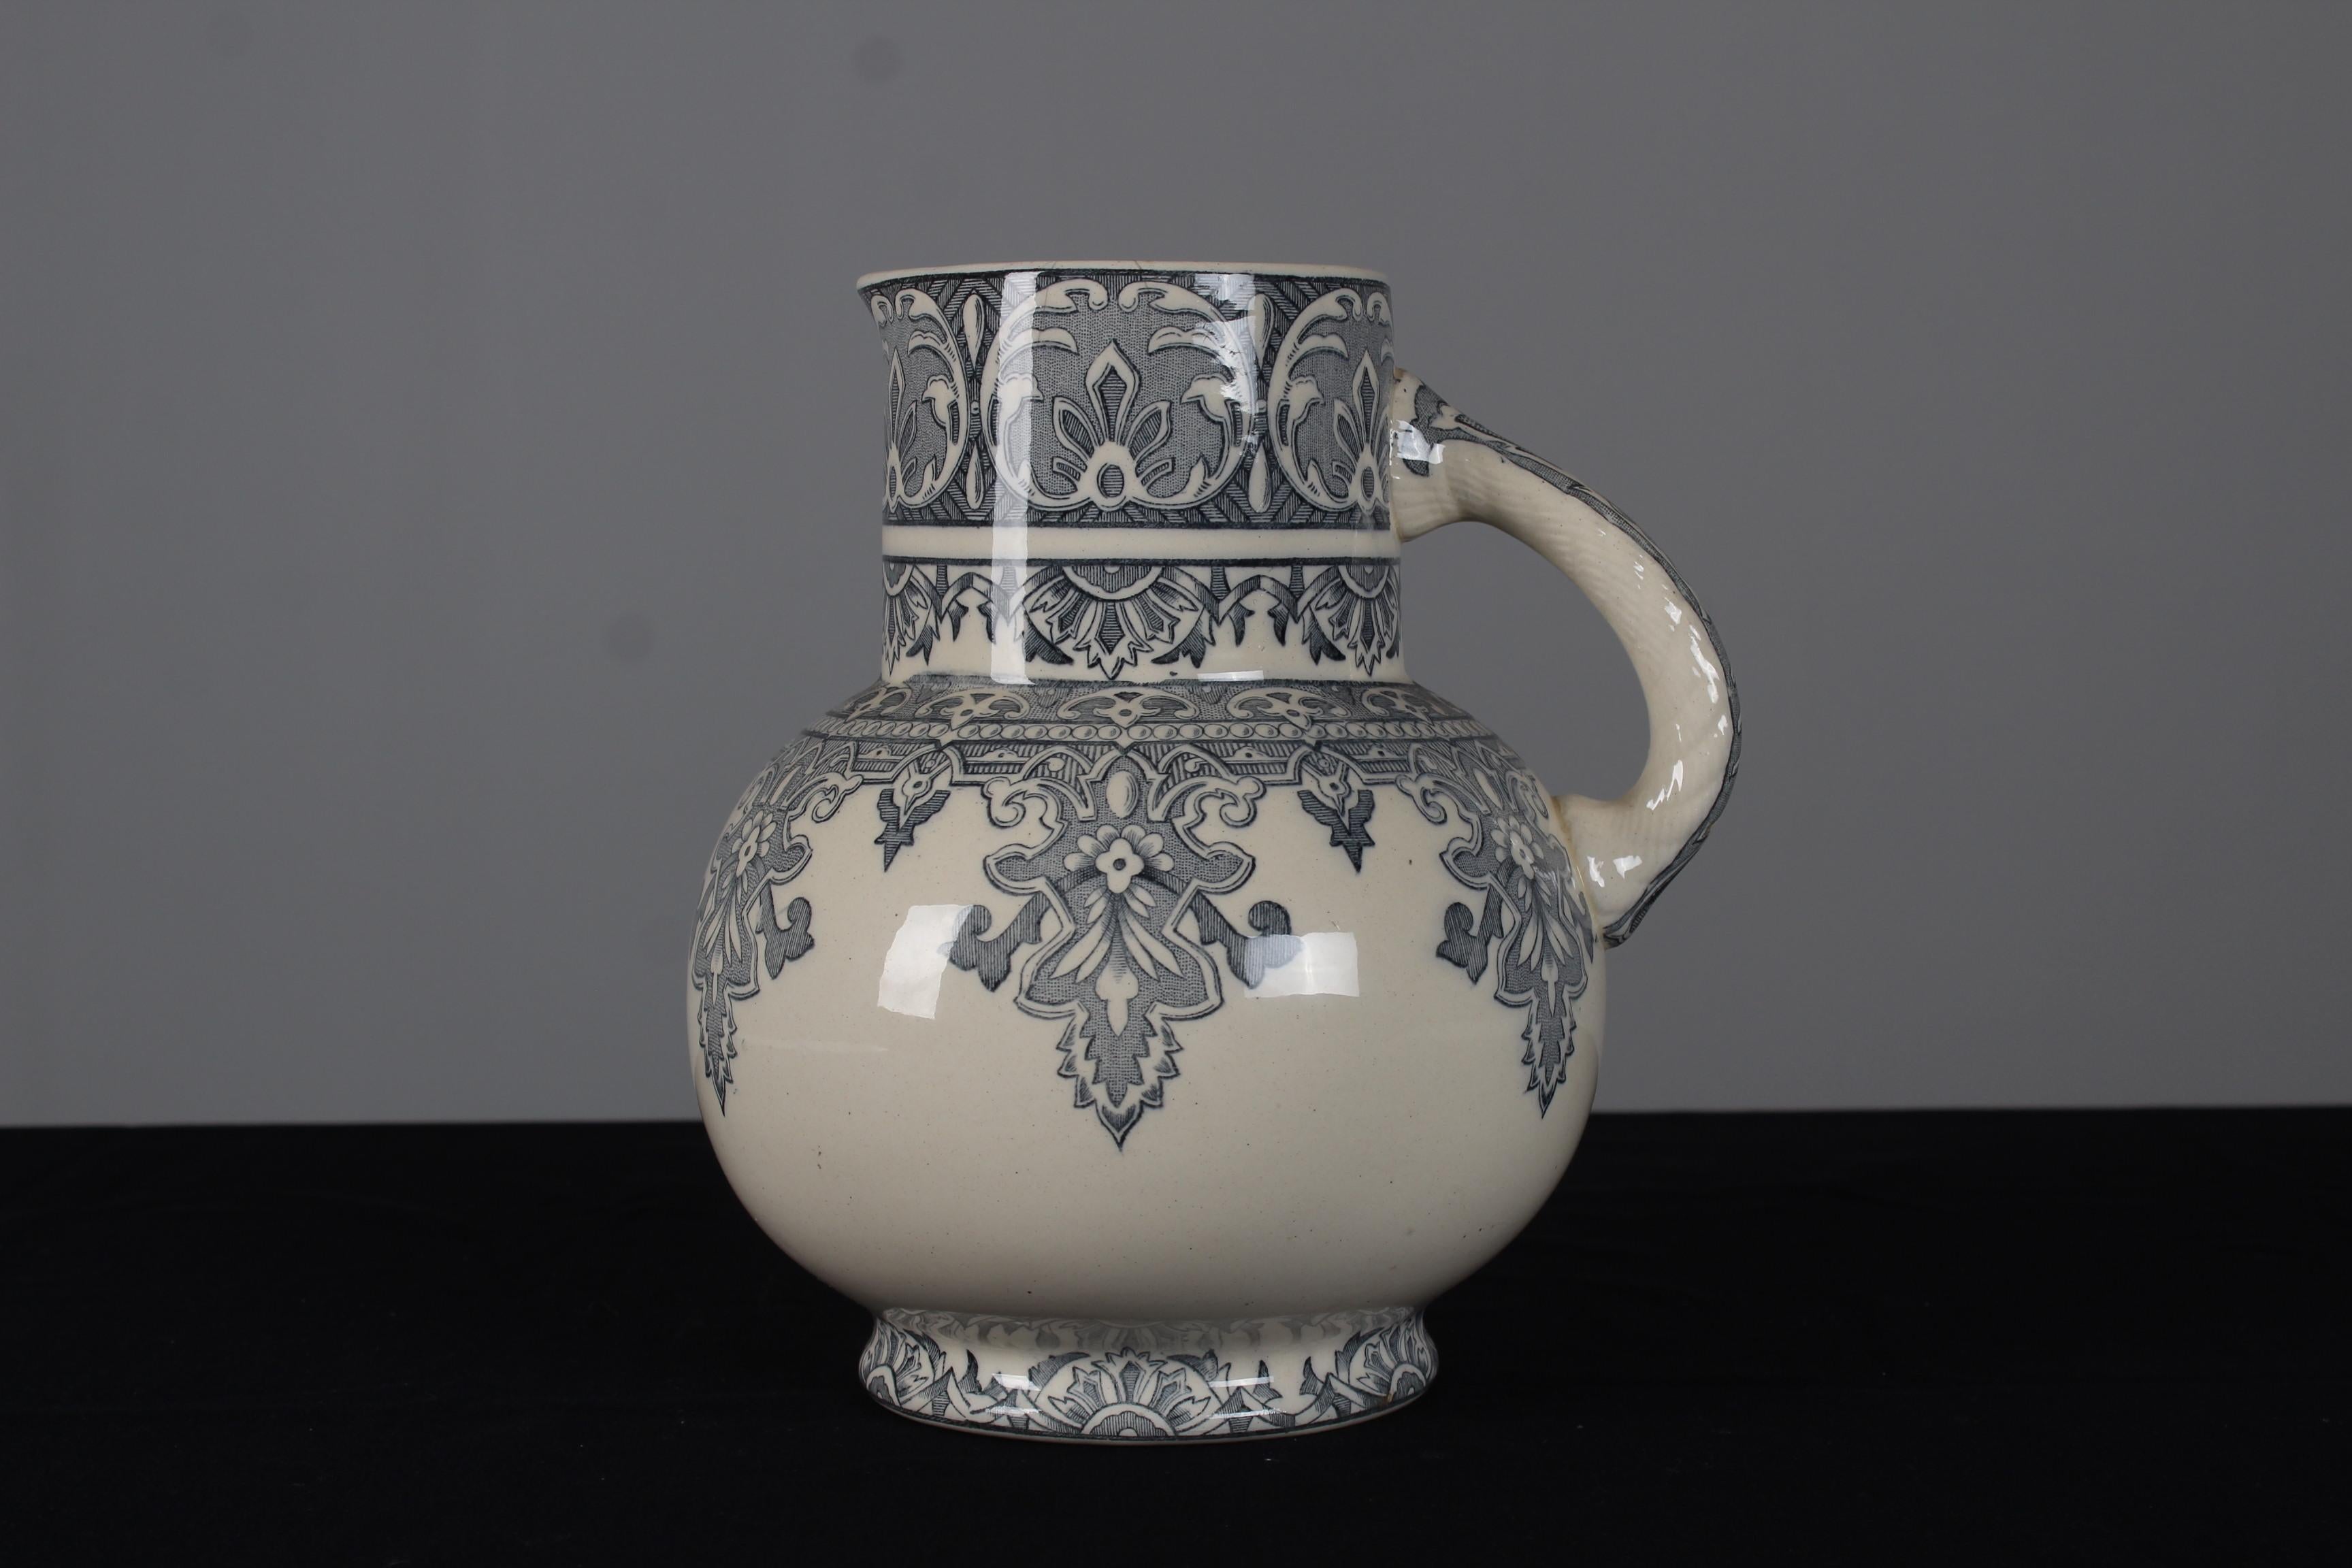 Beautiful large ceramic jug in a moorish style, France, circa 1880.
Stamped at the bottom 